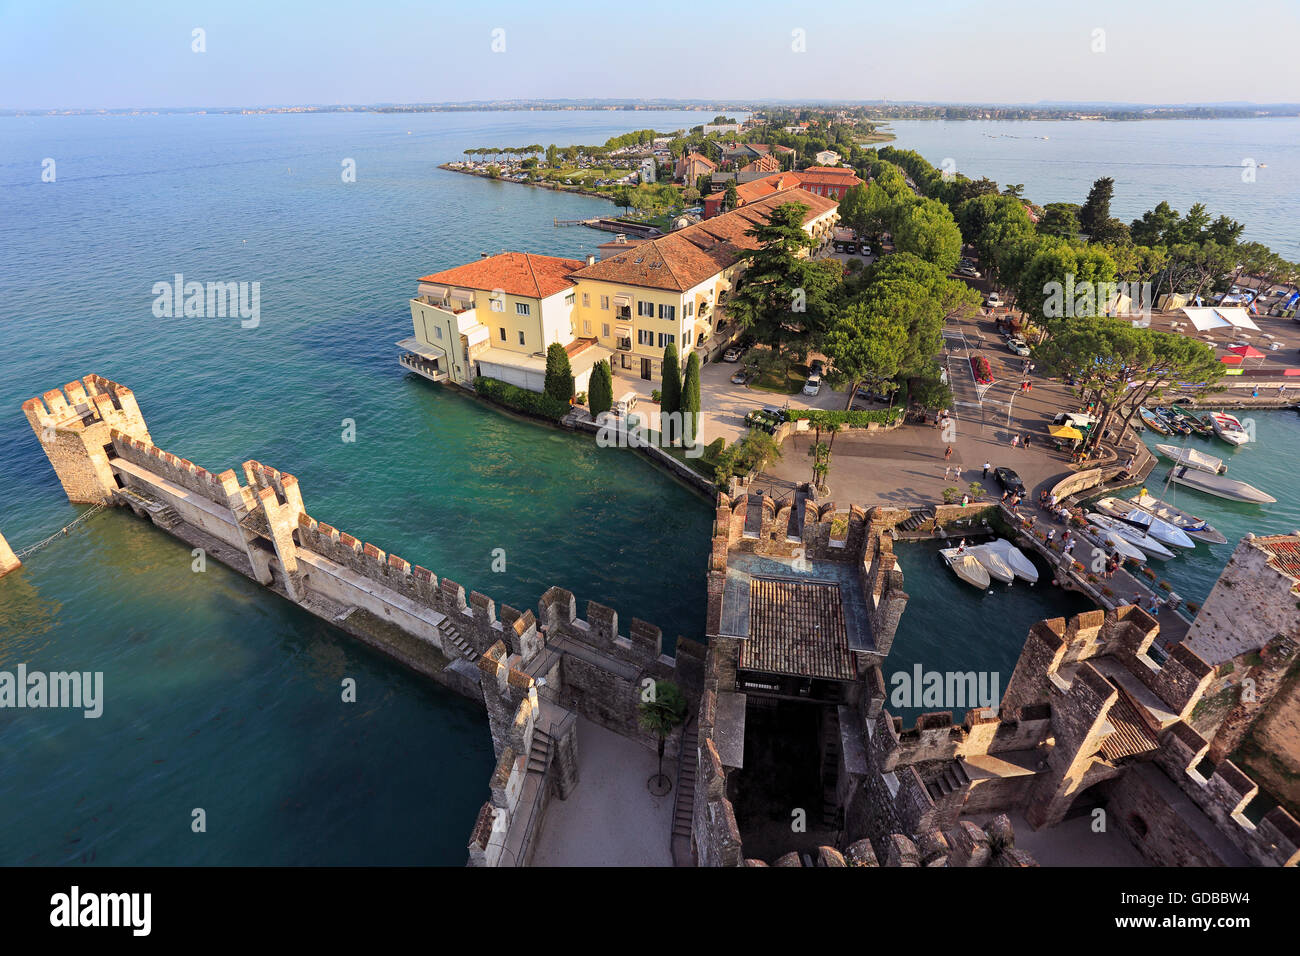 Aerial View of Sirmione from the Scaliger Castle over the Garda Lake, Italy Stock Photo